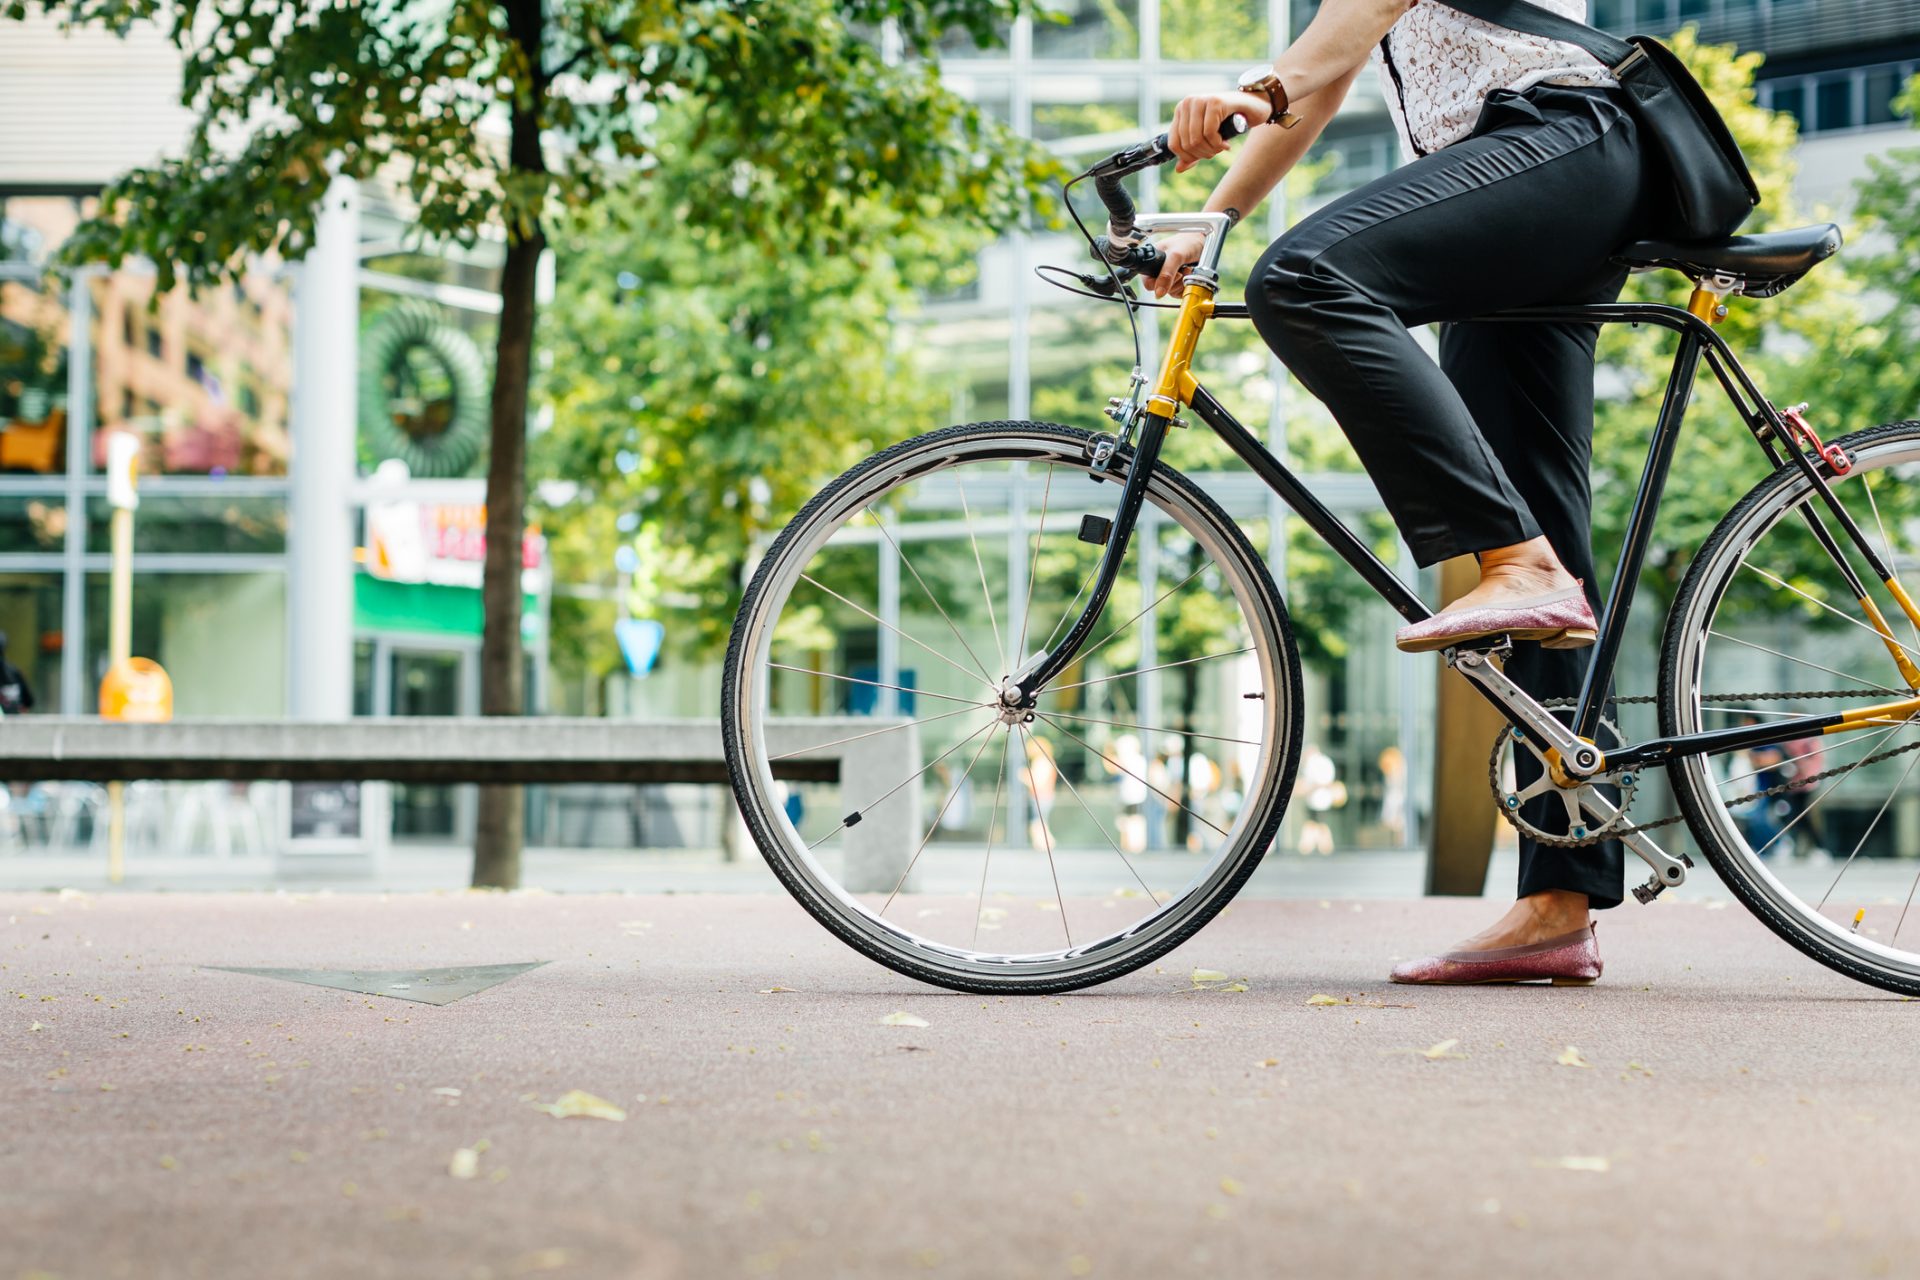 Did you know some countries actually pay people to cycle to work?